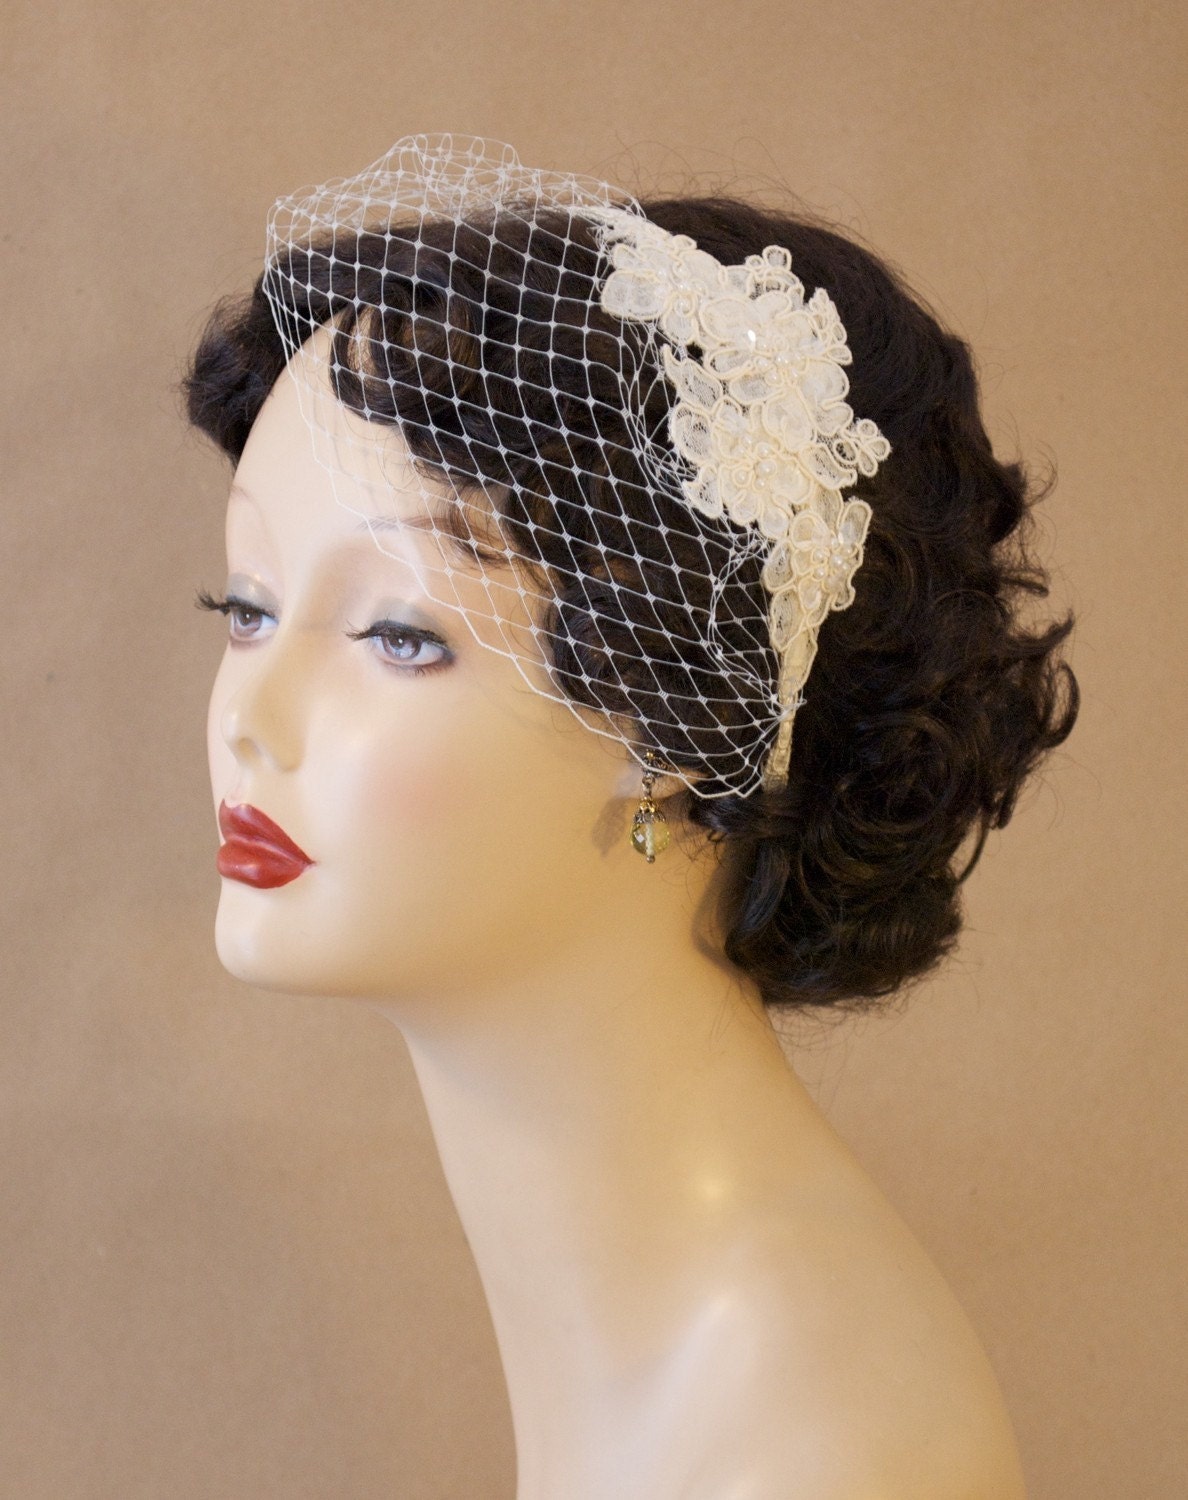 Bridal Birdcage Veil Blusher with Alencon Lace, Bead, and Sequin Fascinator - "Marcia"